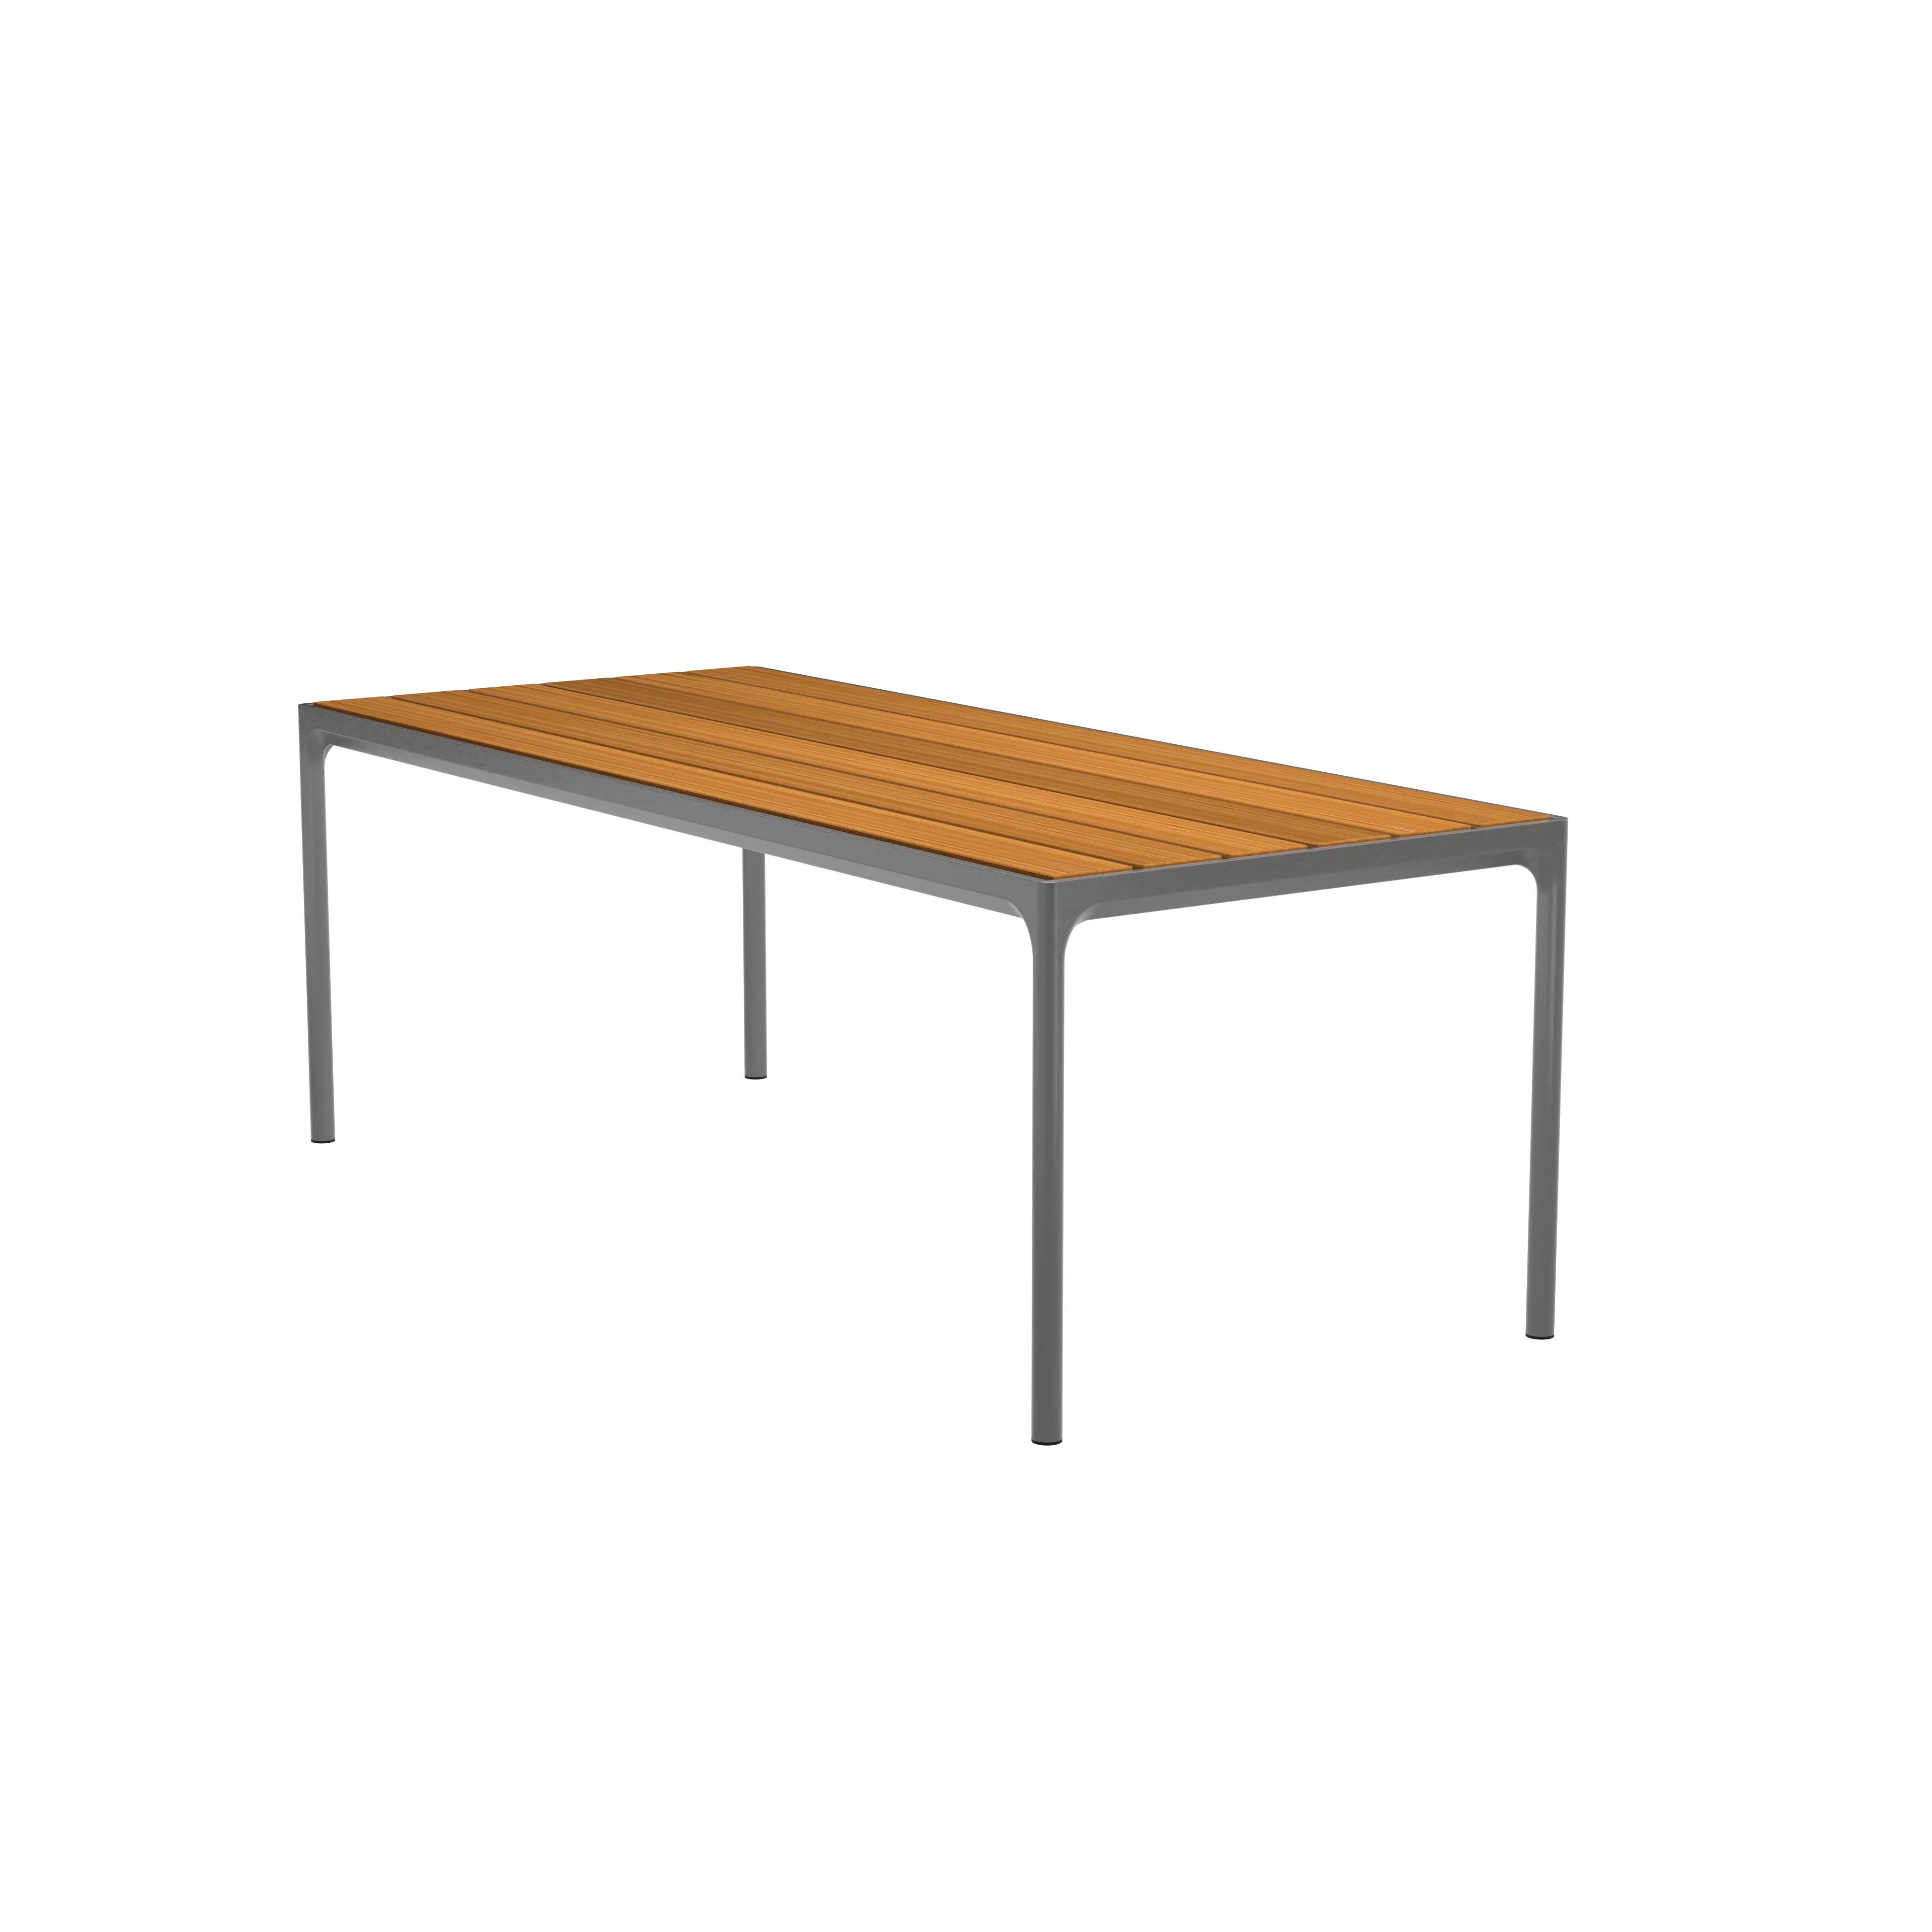 Four dining table 90 x 210 cm - Bamboo, grey